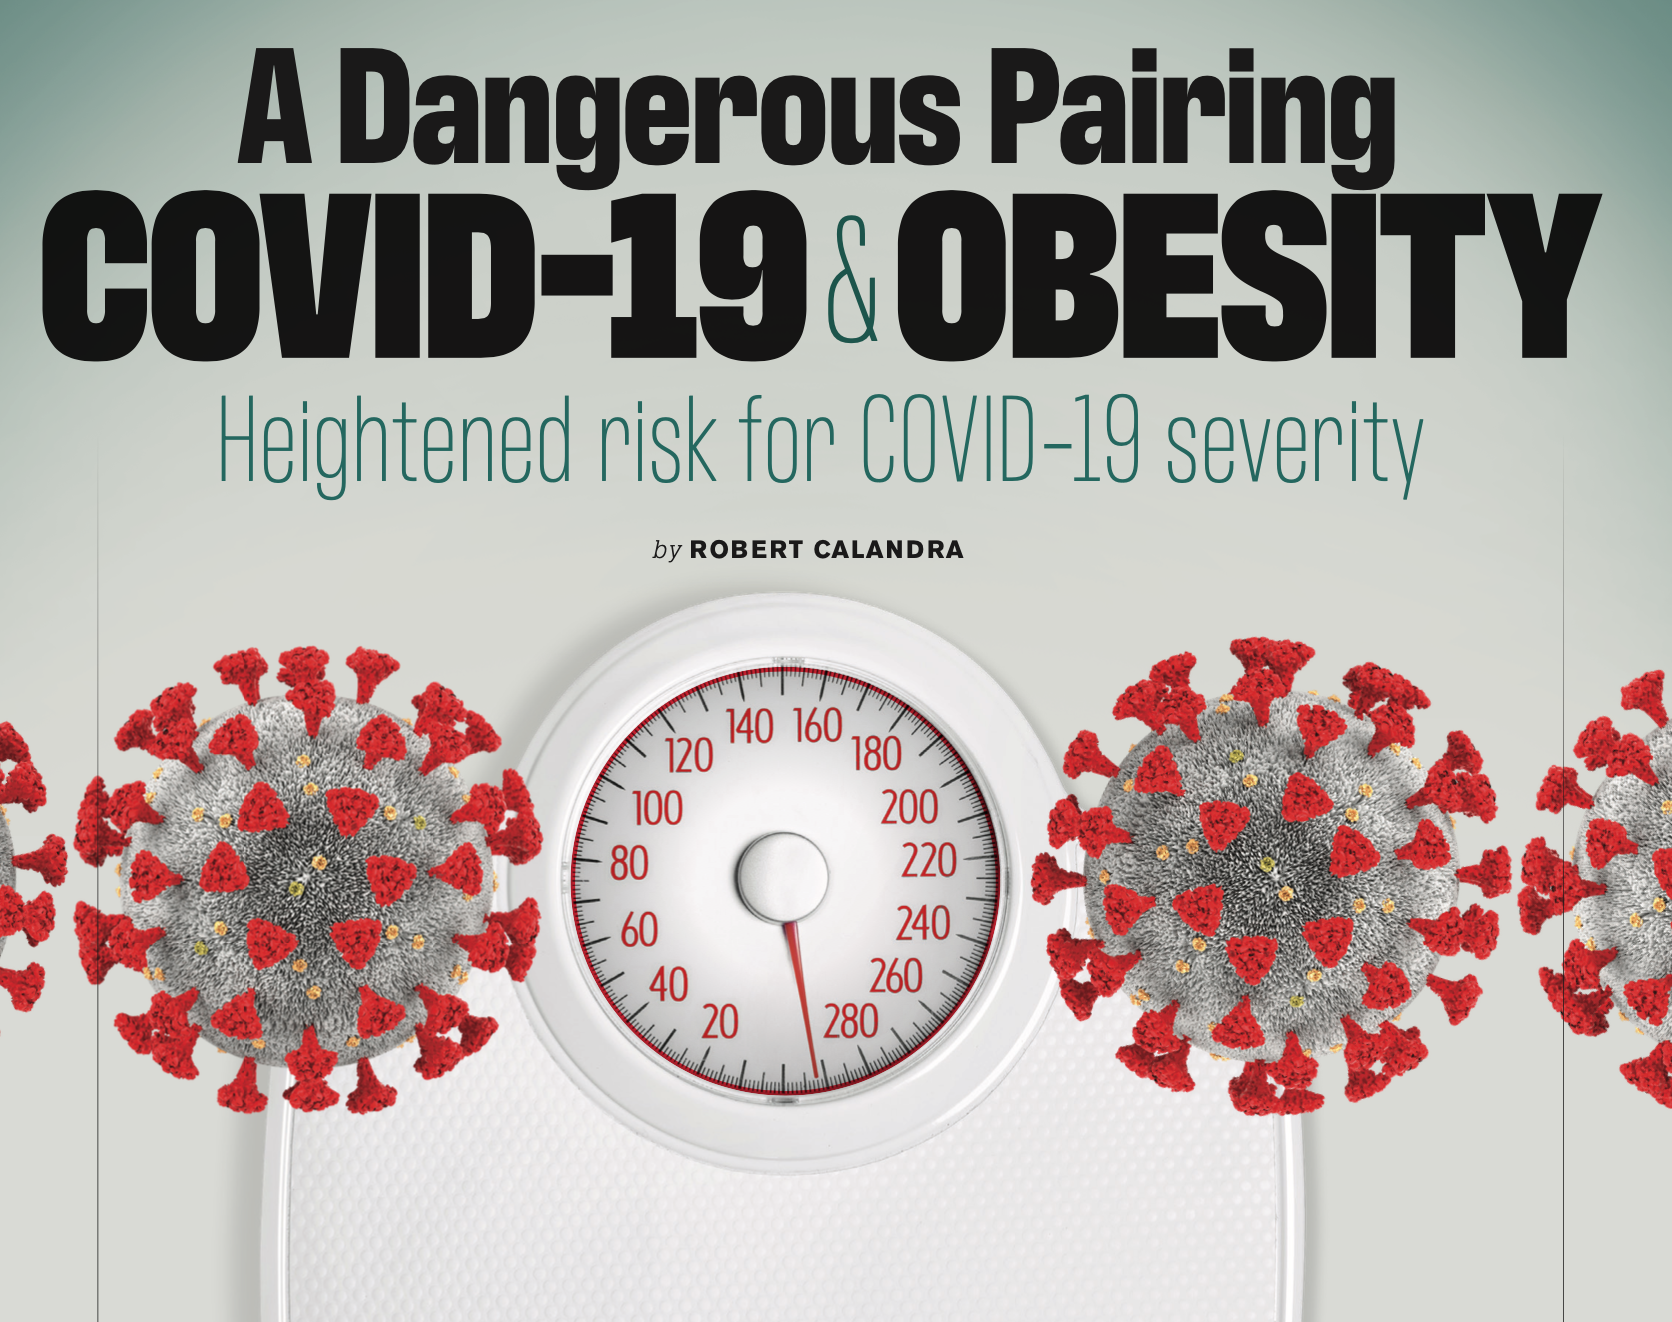 A Dangerous Pairing: COVID-19 & Obesity - Heightened Risk for COVID-19 Severity